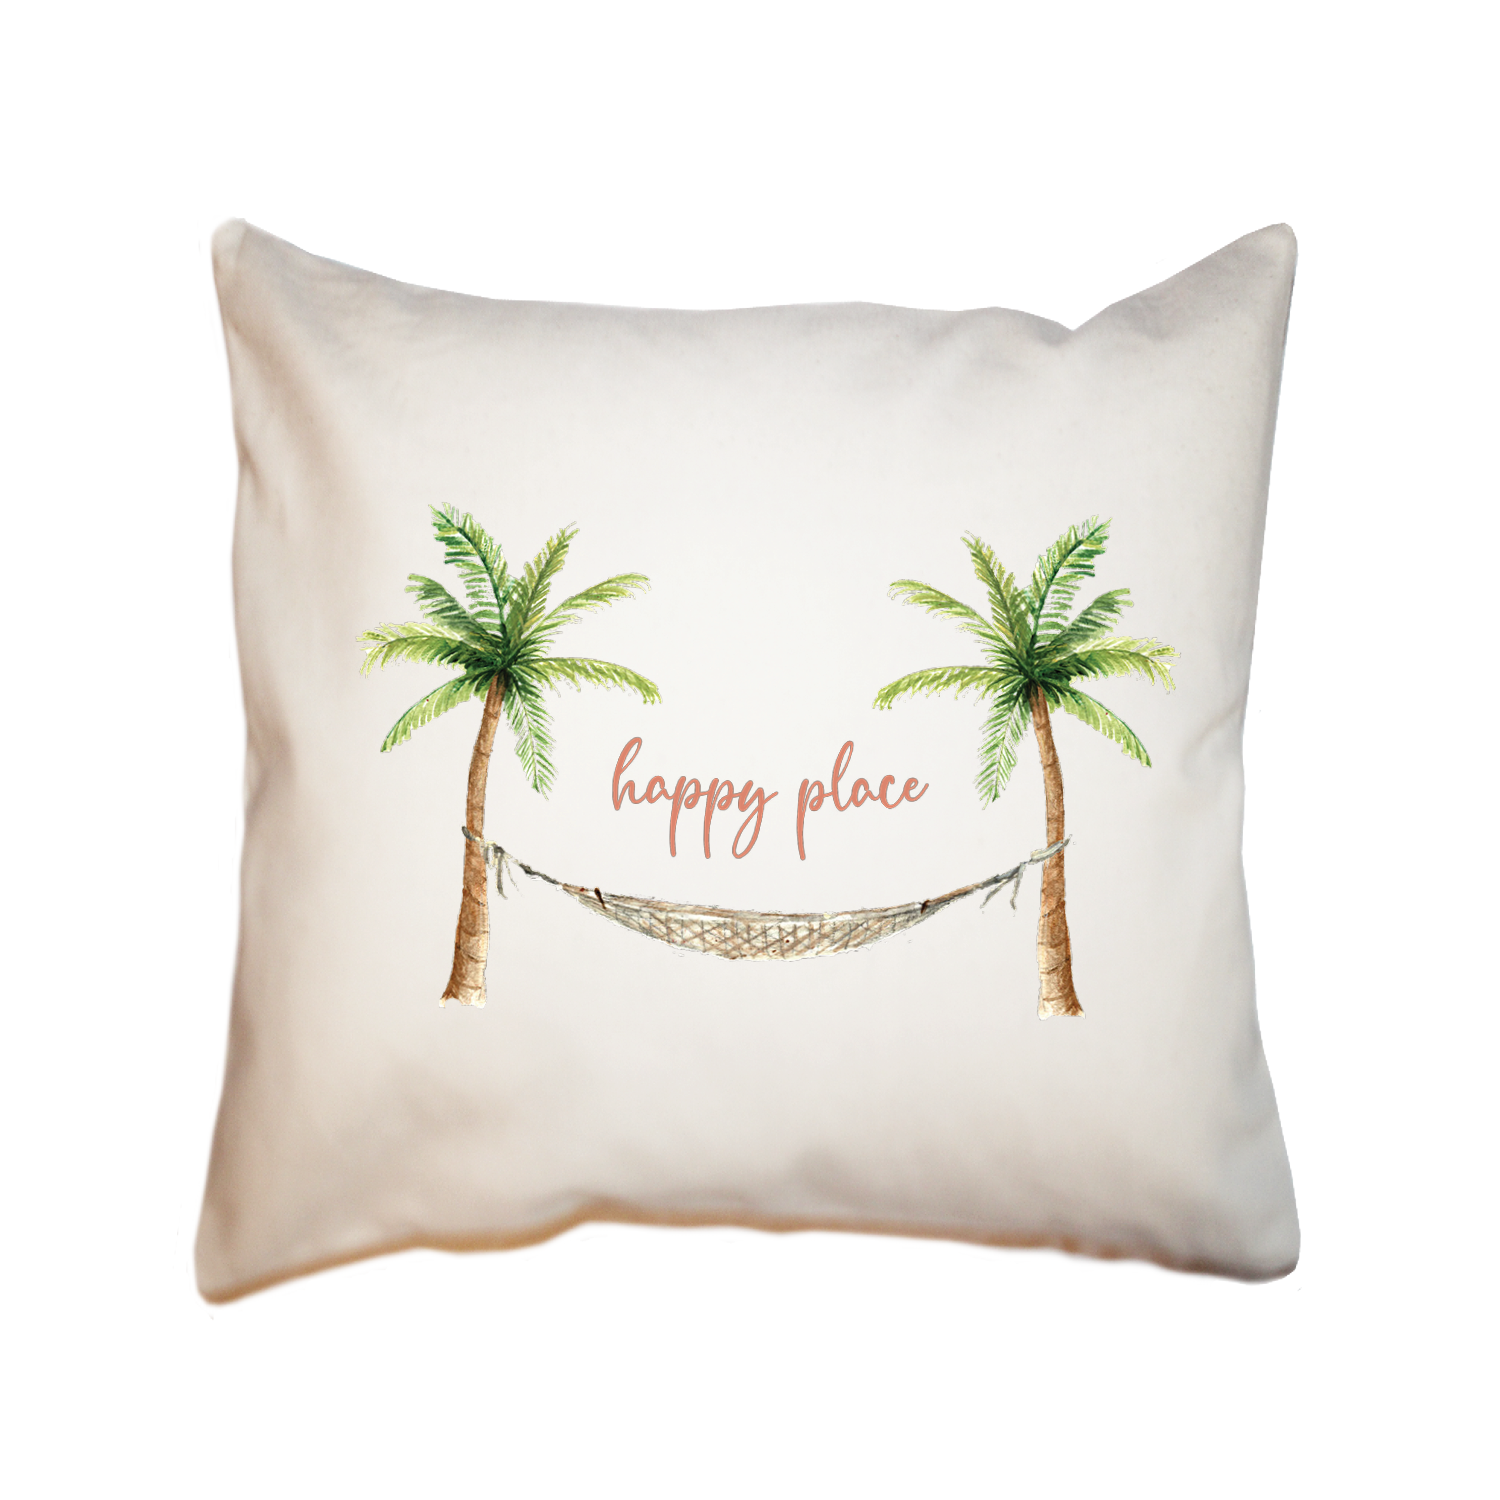 happy place square pillow